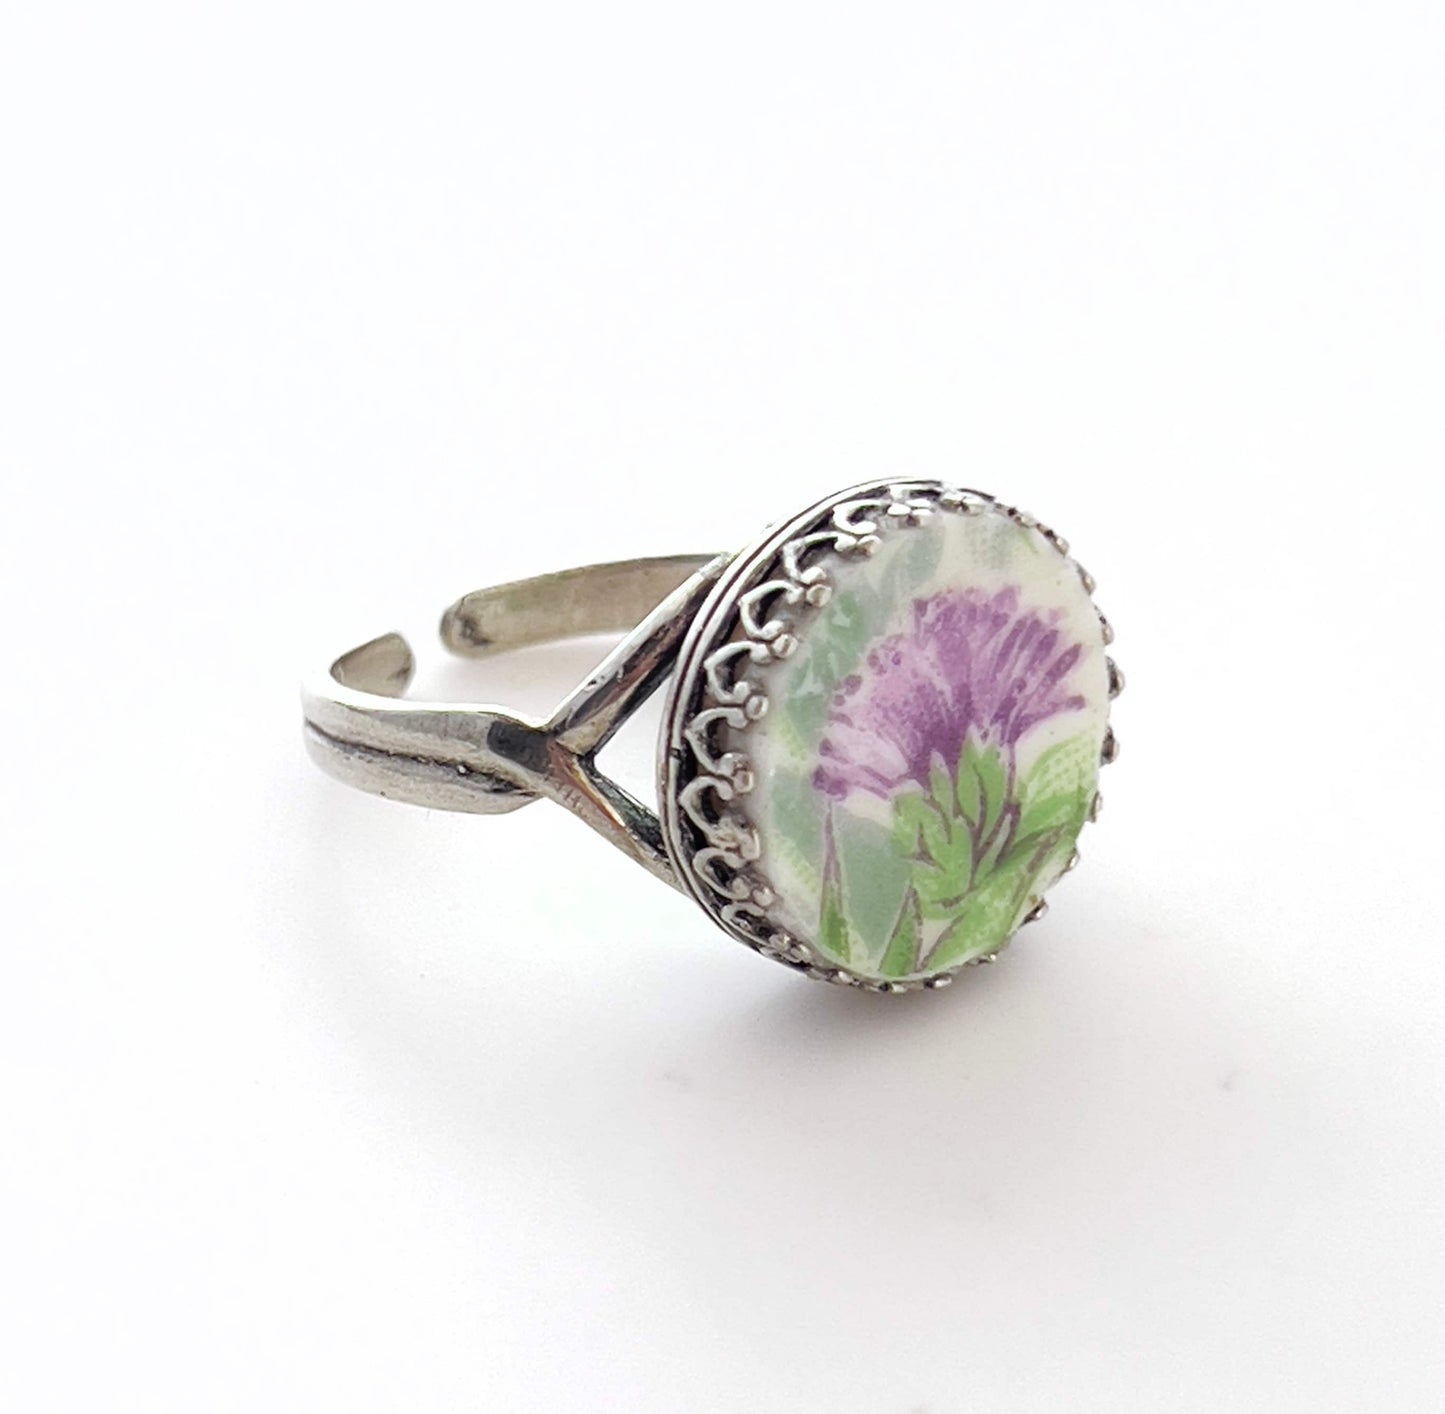 Scottish Thistle Broken China Jewelry Ring, Vintage Chintz China, Sterling Silver Adjustable Ring